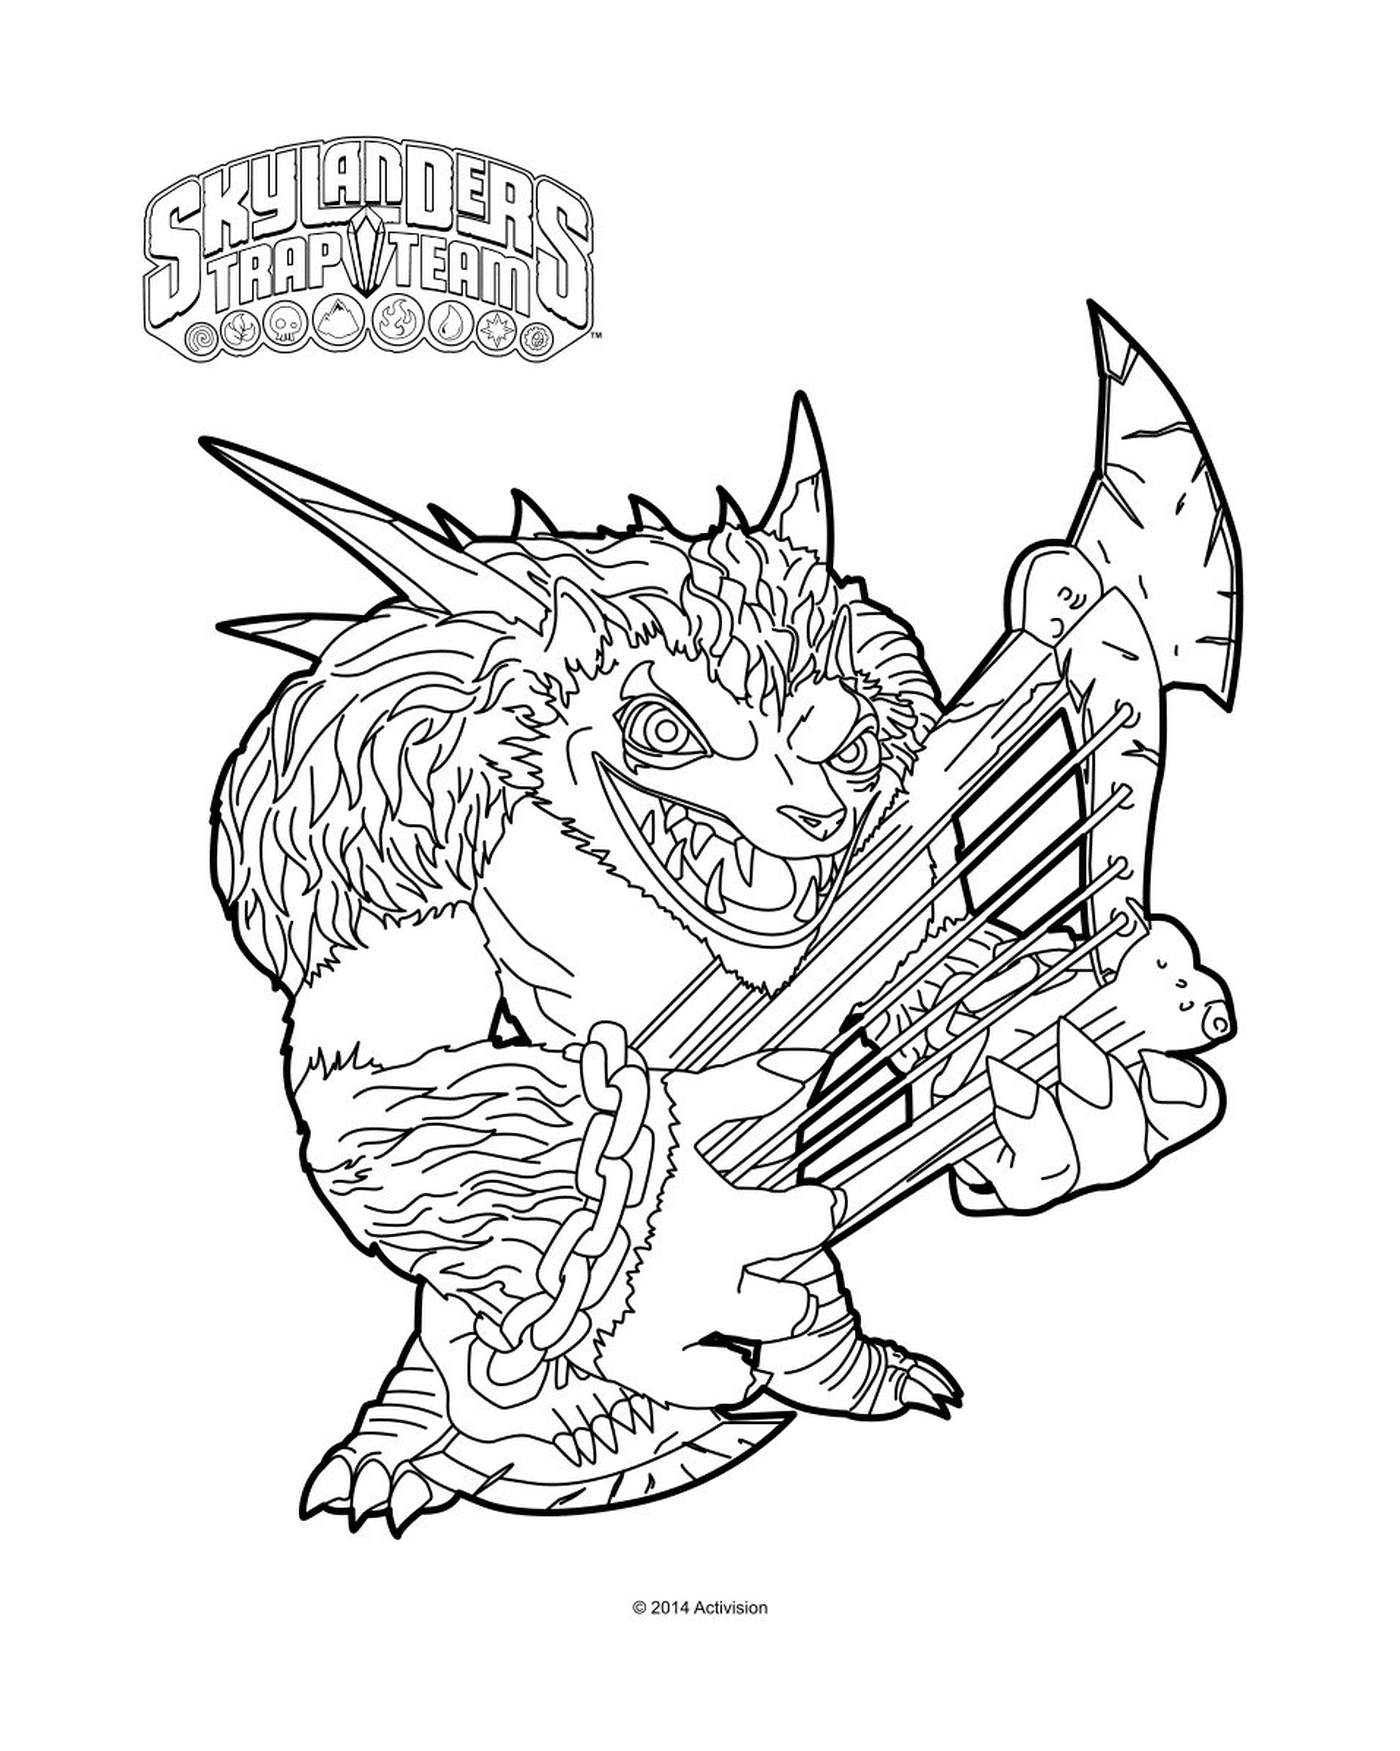  Wolfgang, a monster with a guitar 